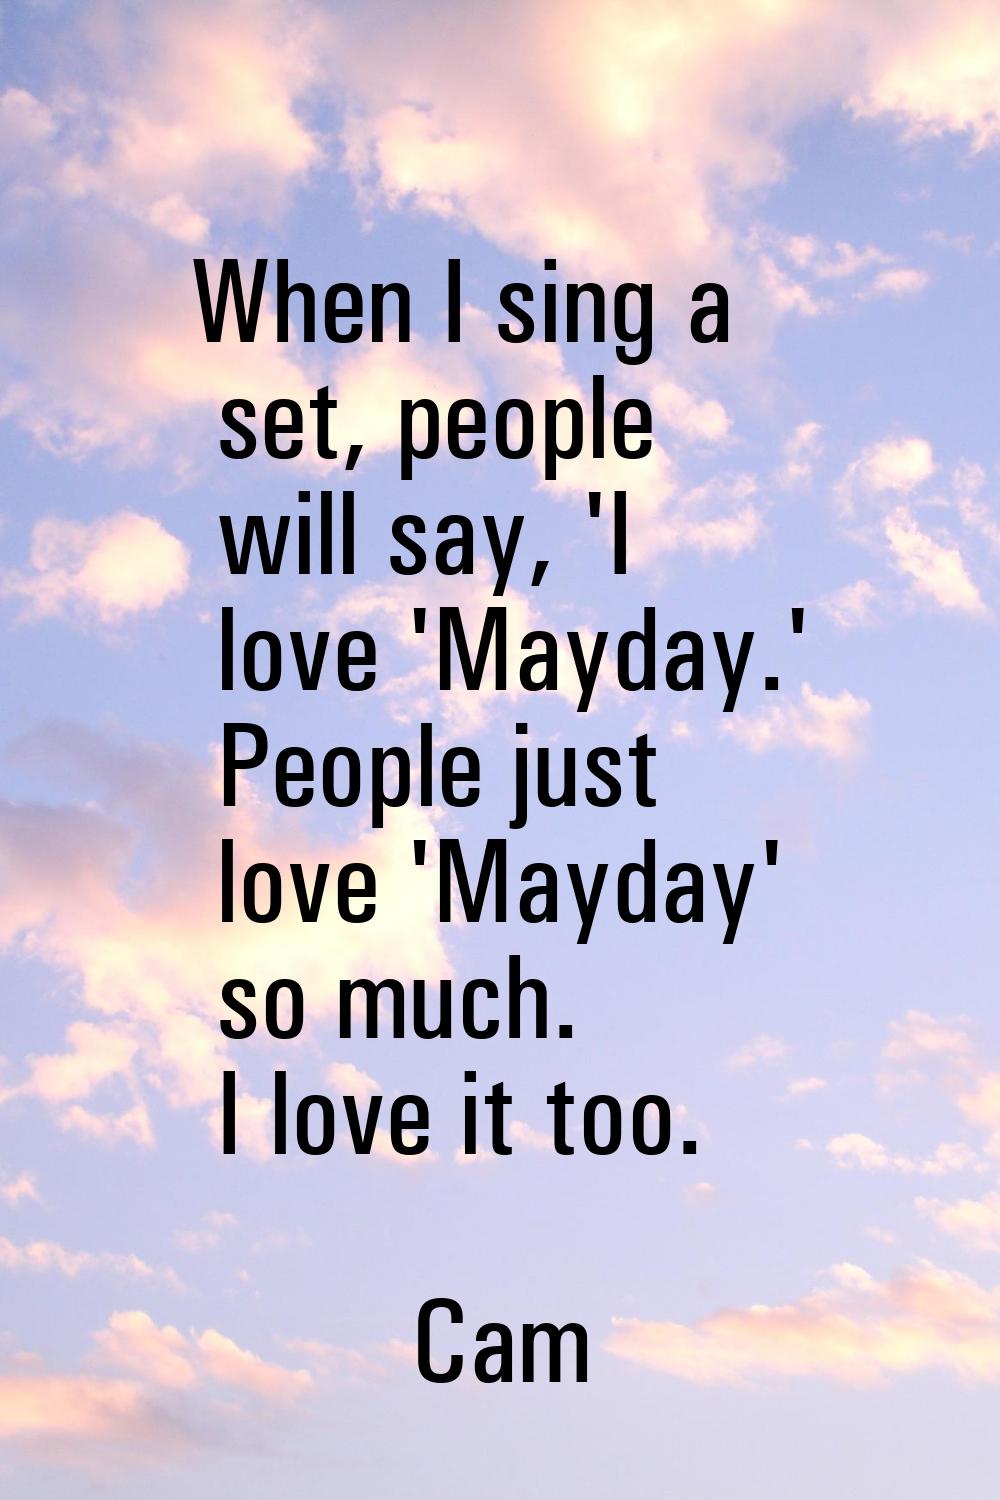 When I sing a set, people will say, 'I love 'Mayday.' People just love 'Mayday' so much. I love it 